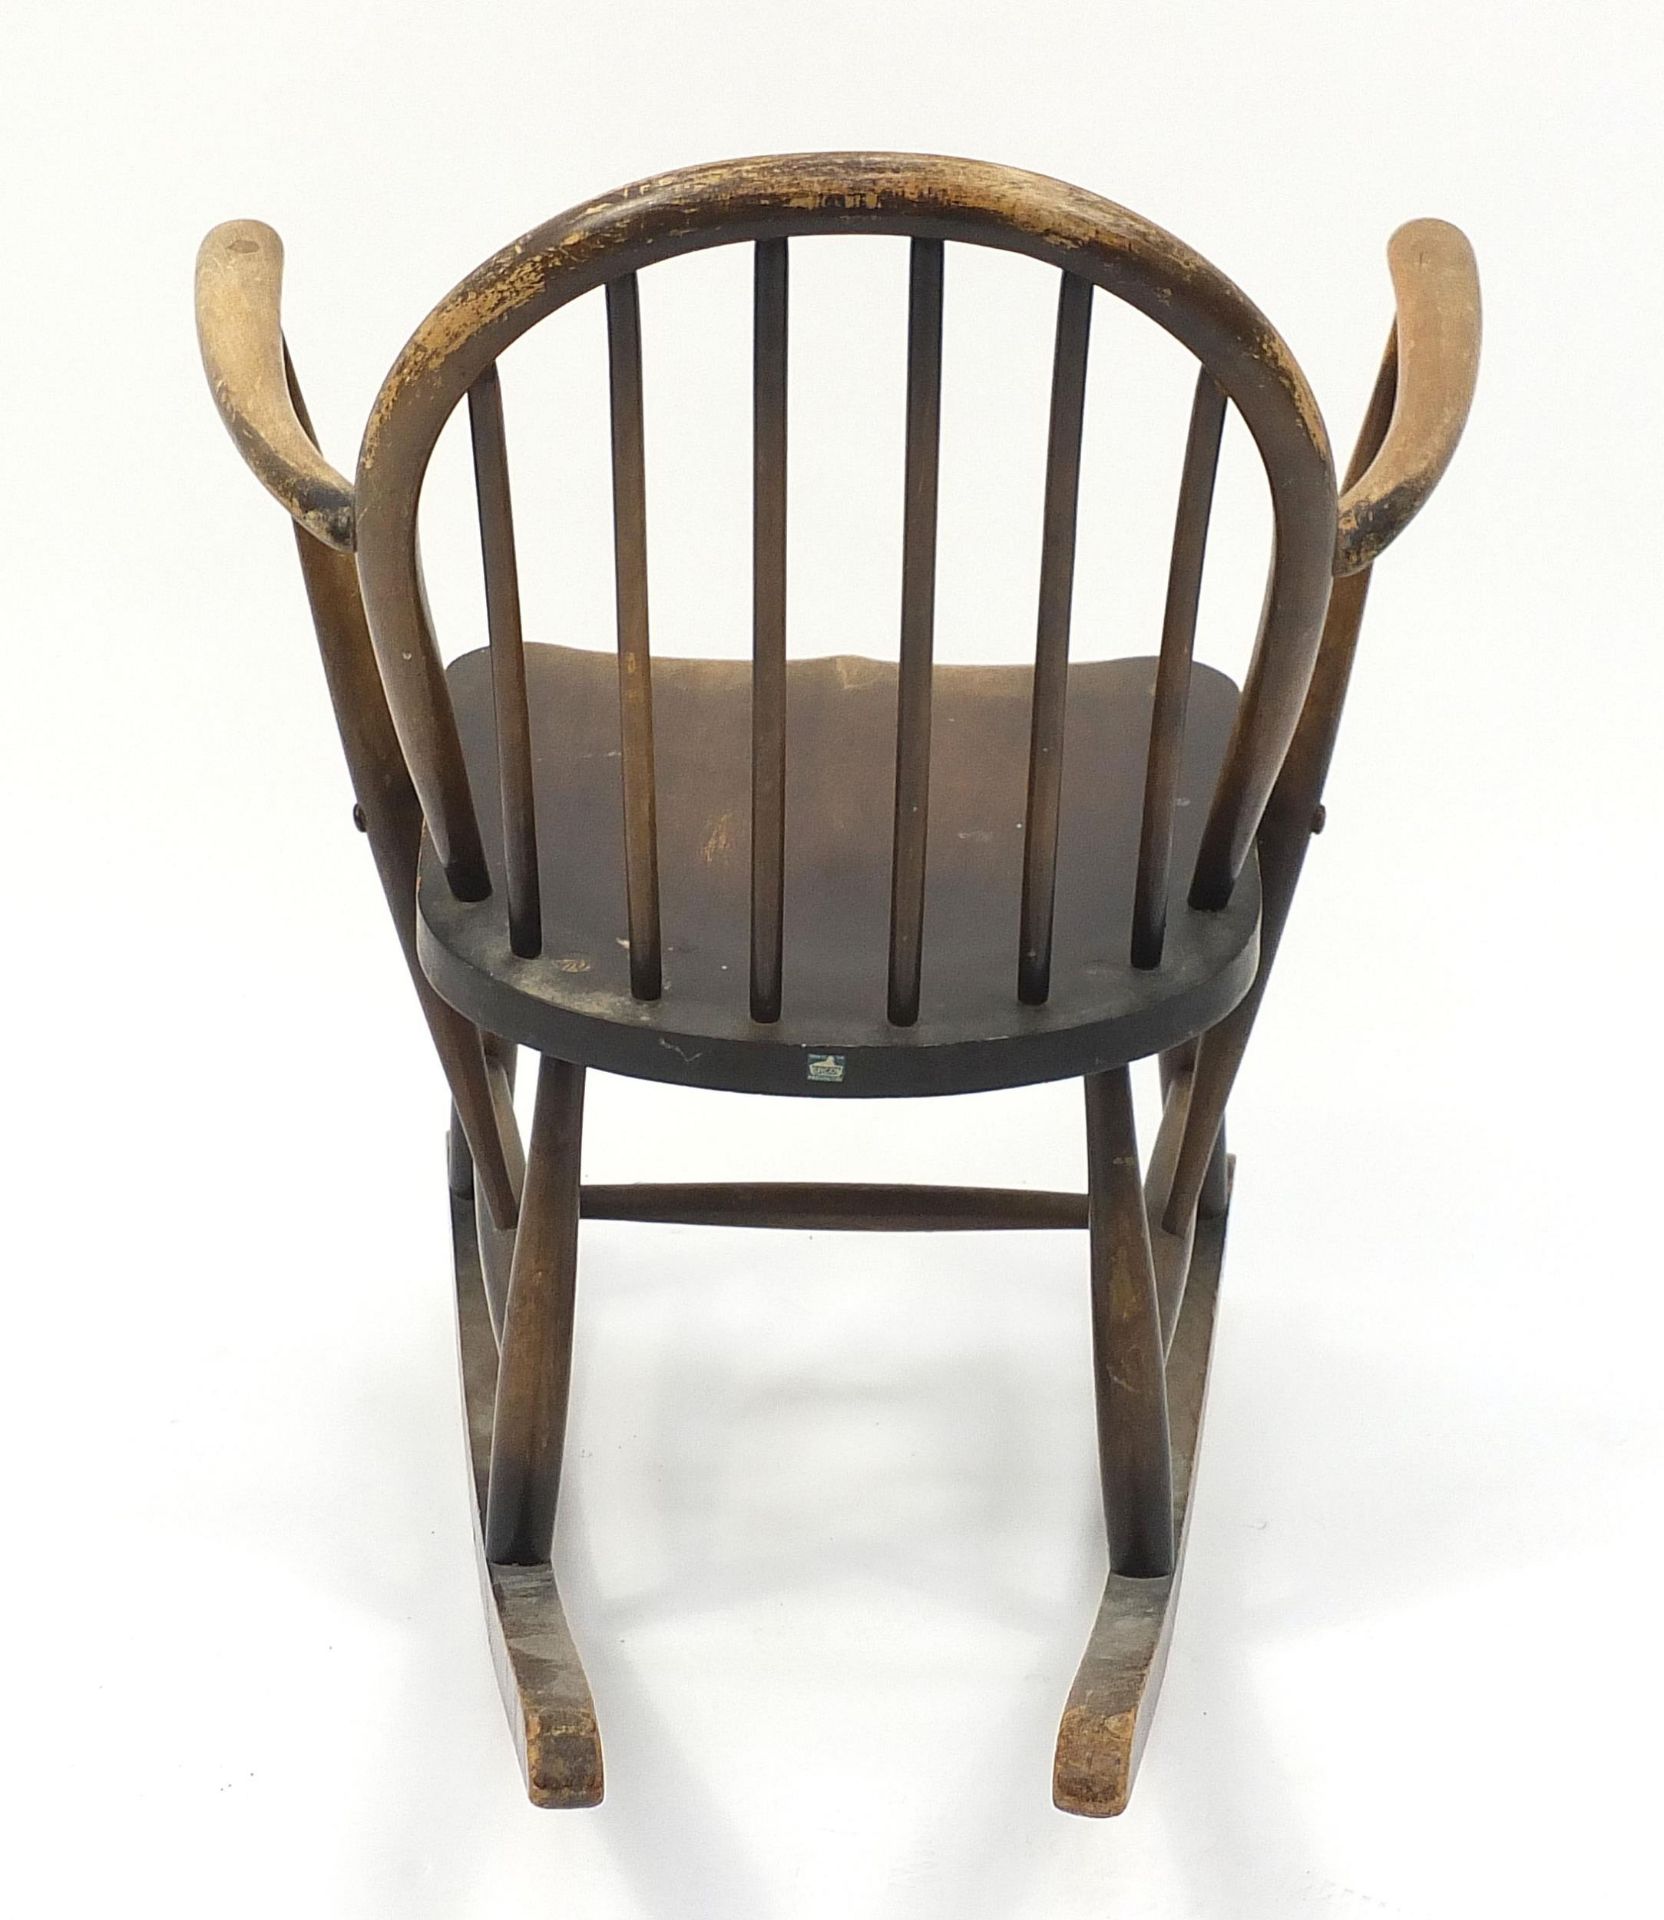 Ercol elm child's rocking chair, 75cm high - Image 4 of 5